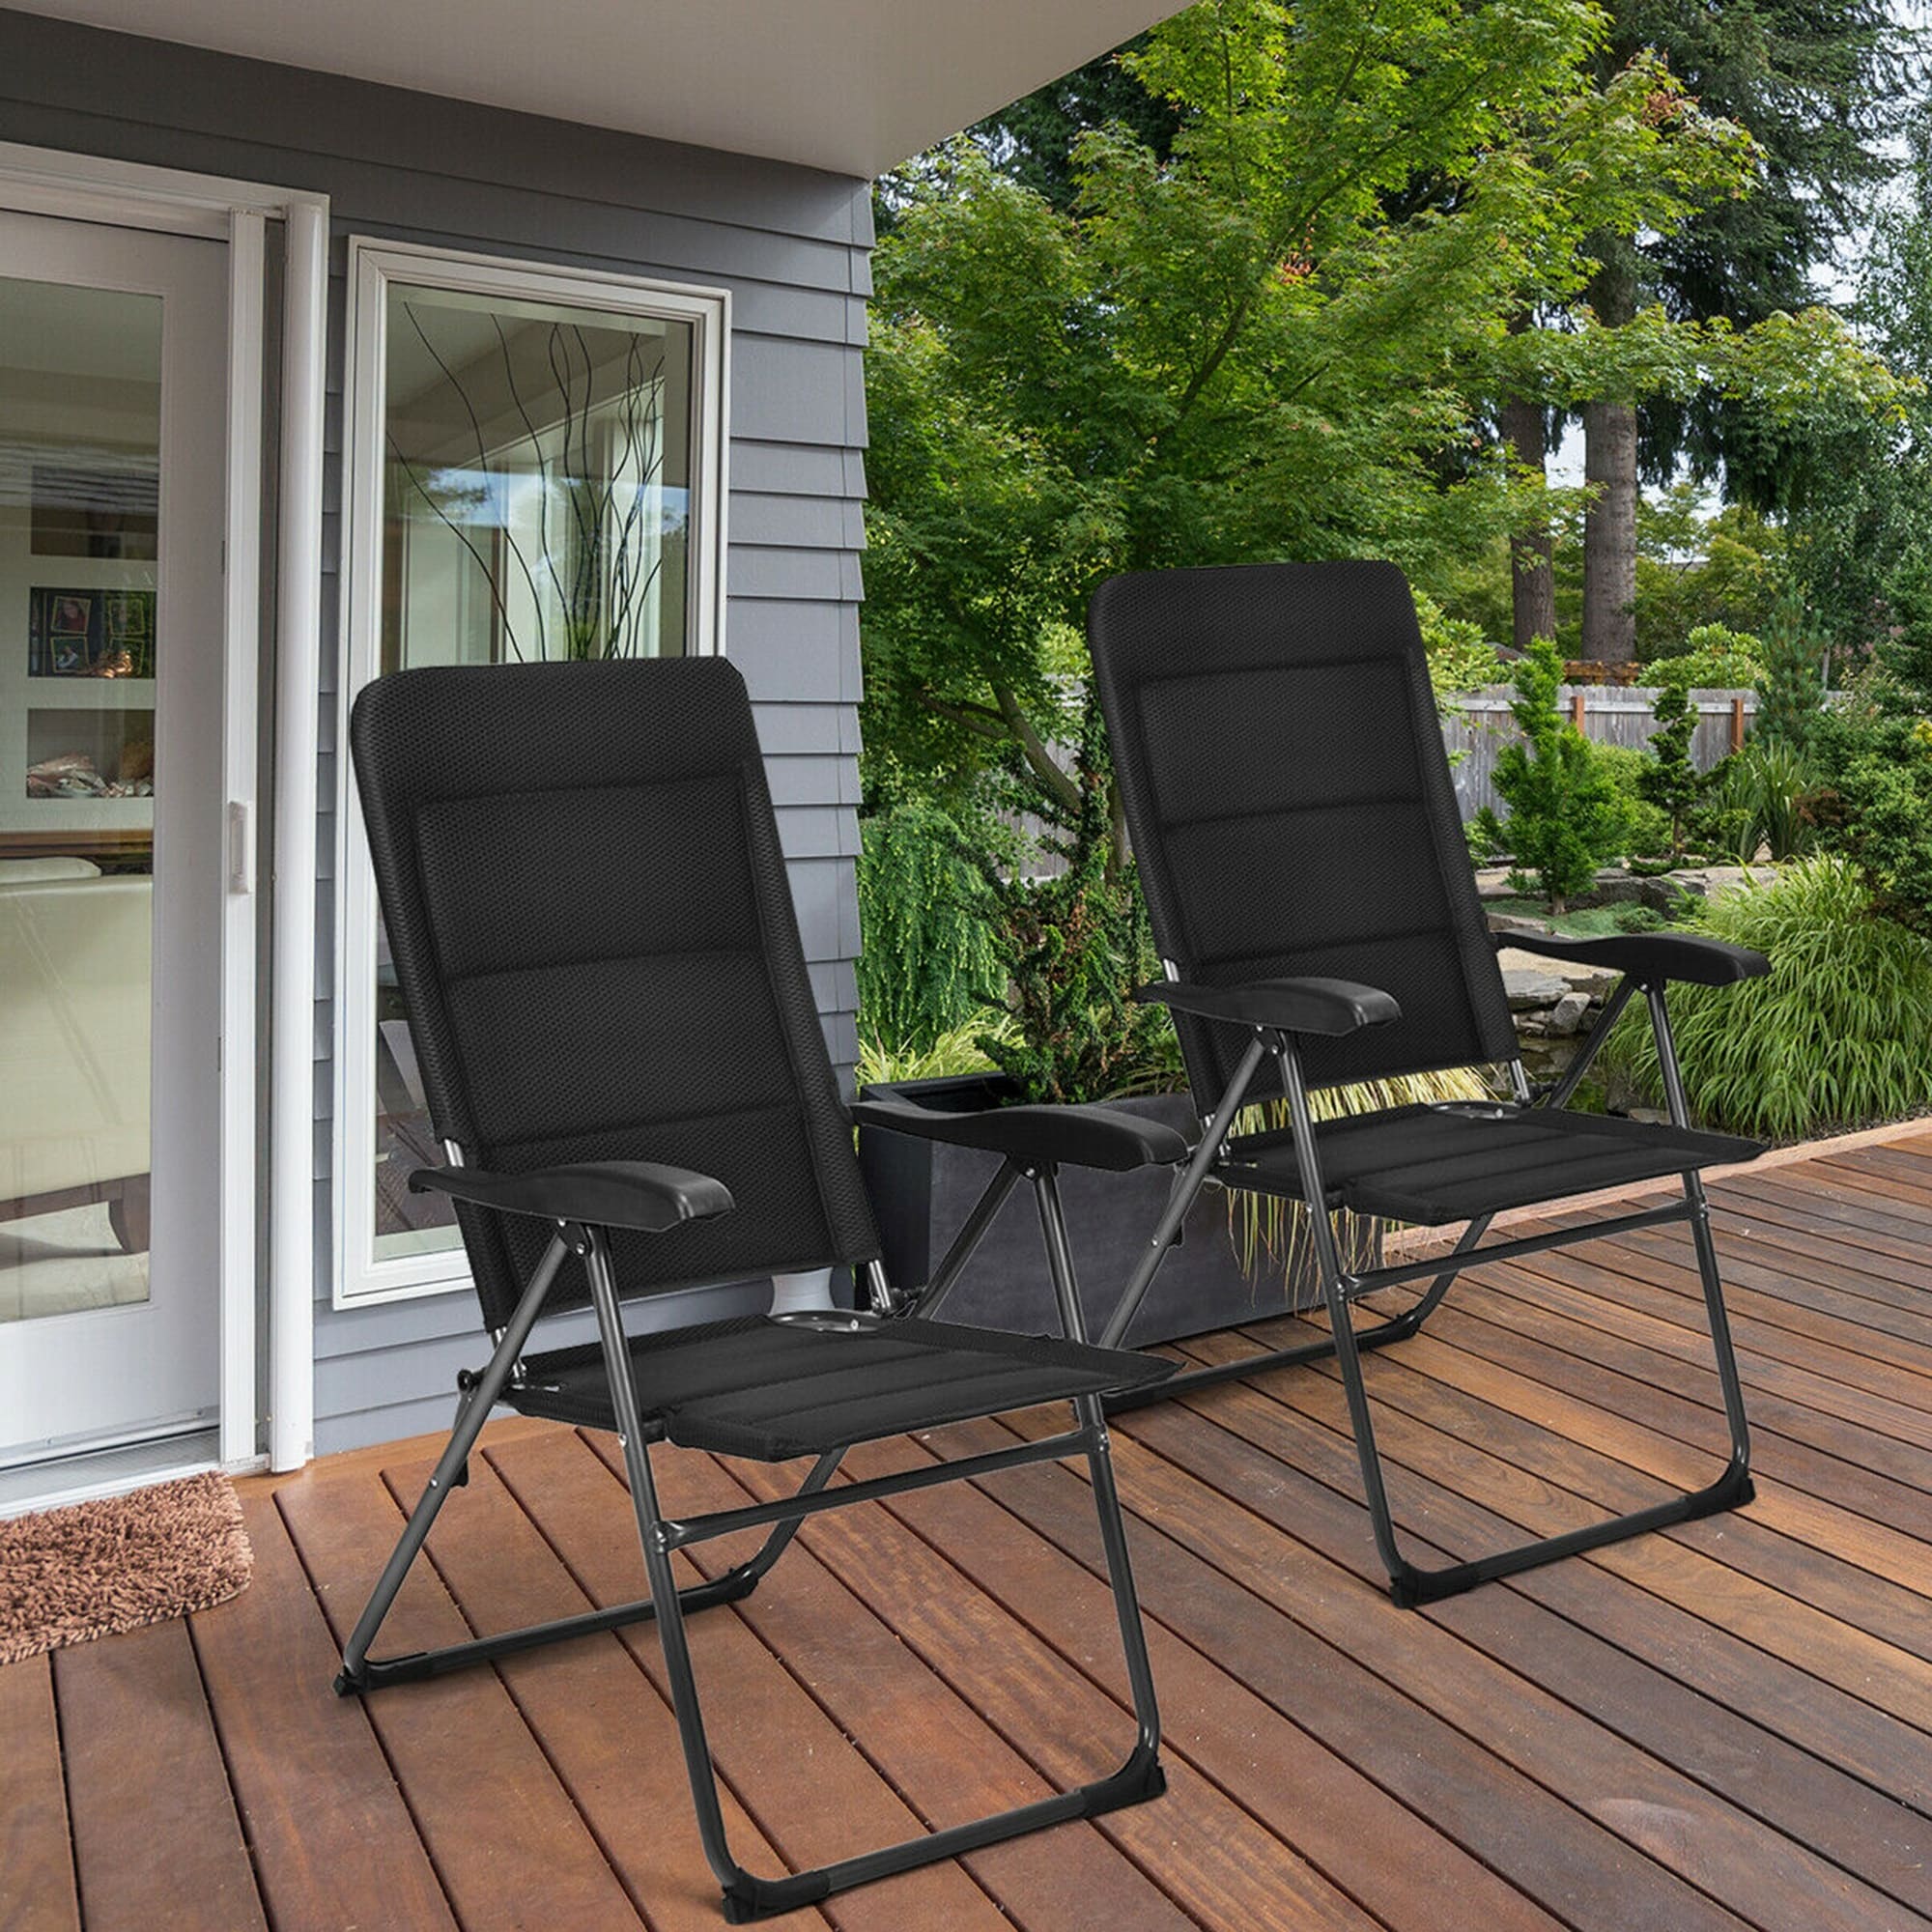 https://ak1.ostkcdn.com/images/products/is/images/direct/41c8898e9db5ed784d5b7862a6183a3c34e9566b/Gymax-2PCS-Patio-Folding-Chairs-Back-Adjustable-Reclining-Padded.jpg